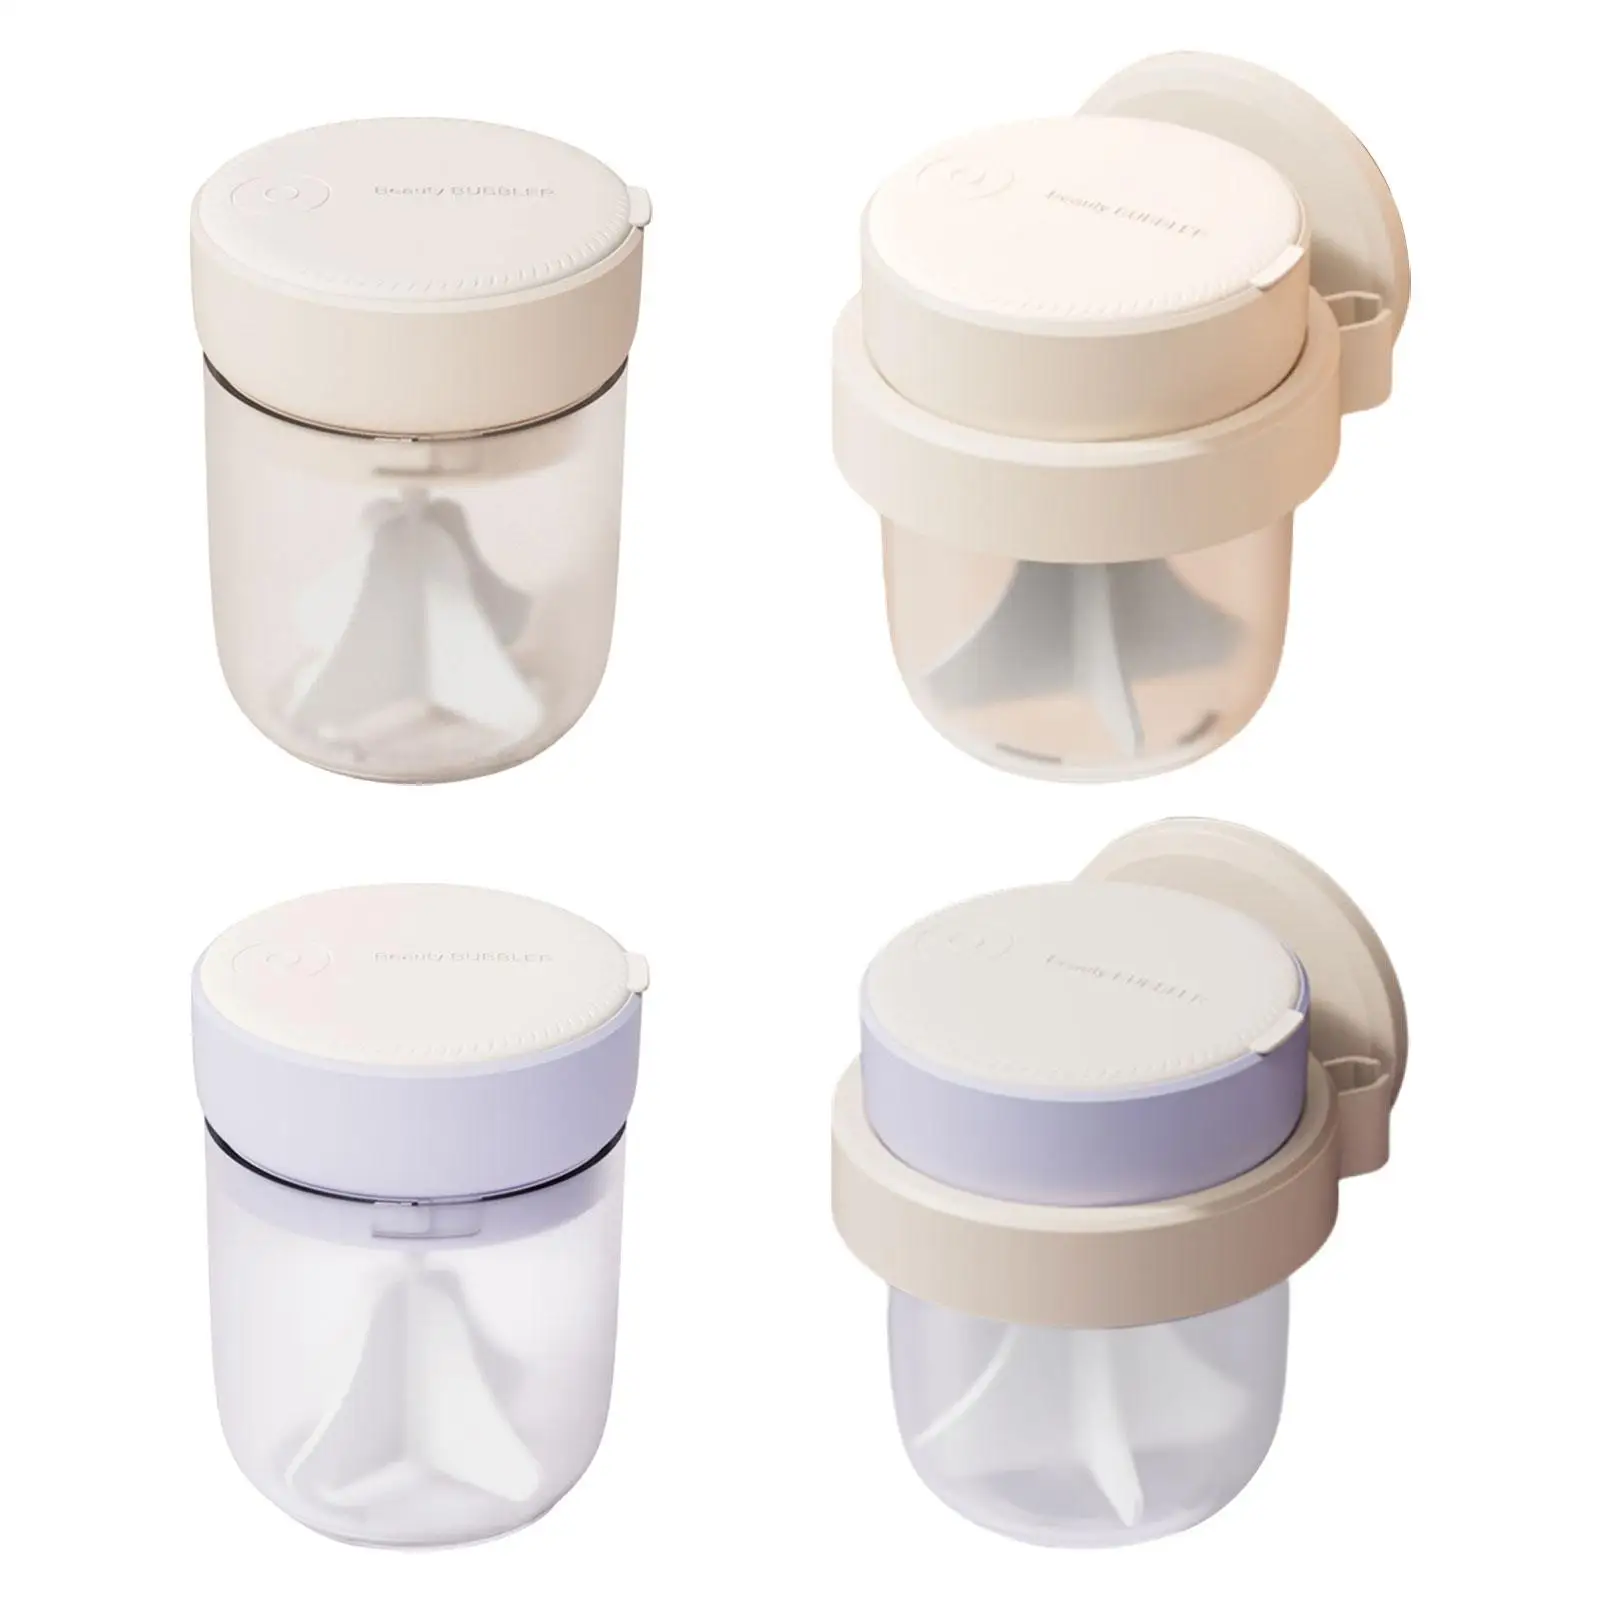 

Facial Cup, Electric Bubble Former,, Quick Bubble Maker, Face Wash for Travel Household